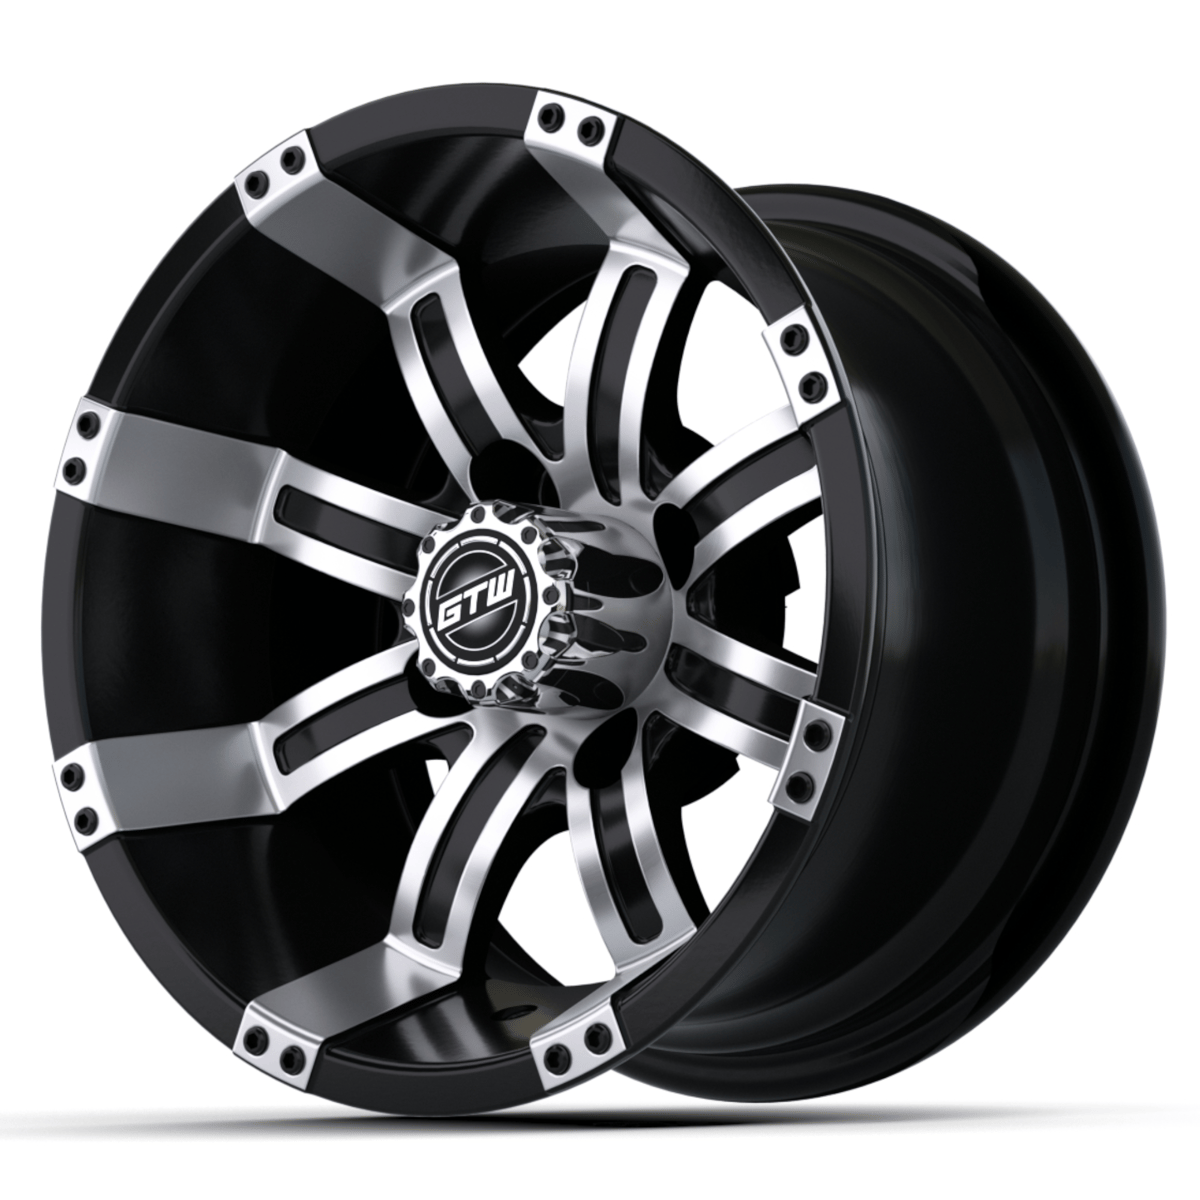 10&Prime; GTW&reg; Tempest Black with Machined Accents Wheel